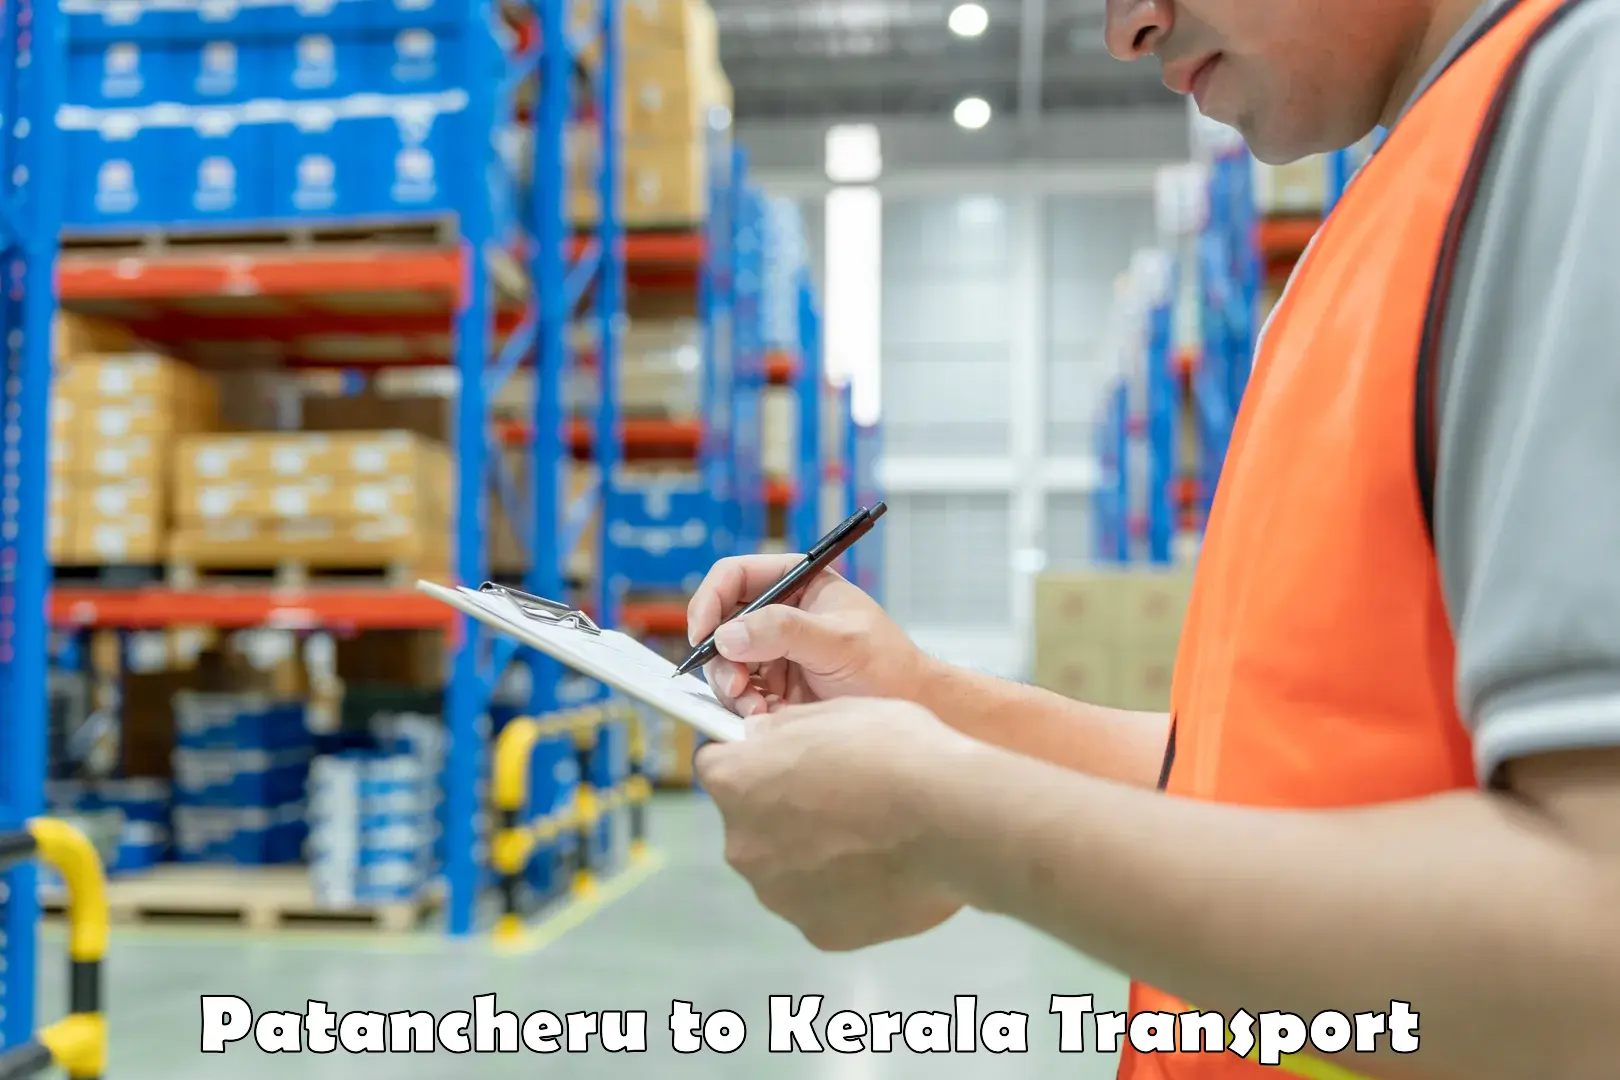 Air freight transport services in Patancheru to Chungatra